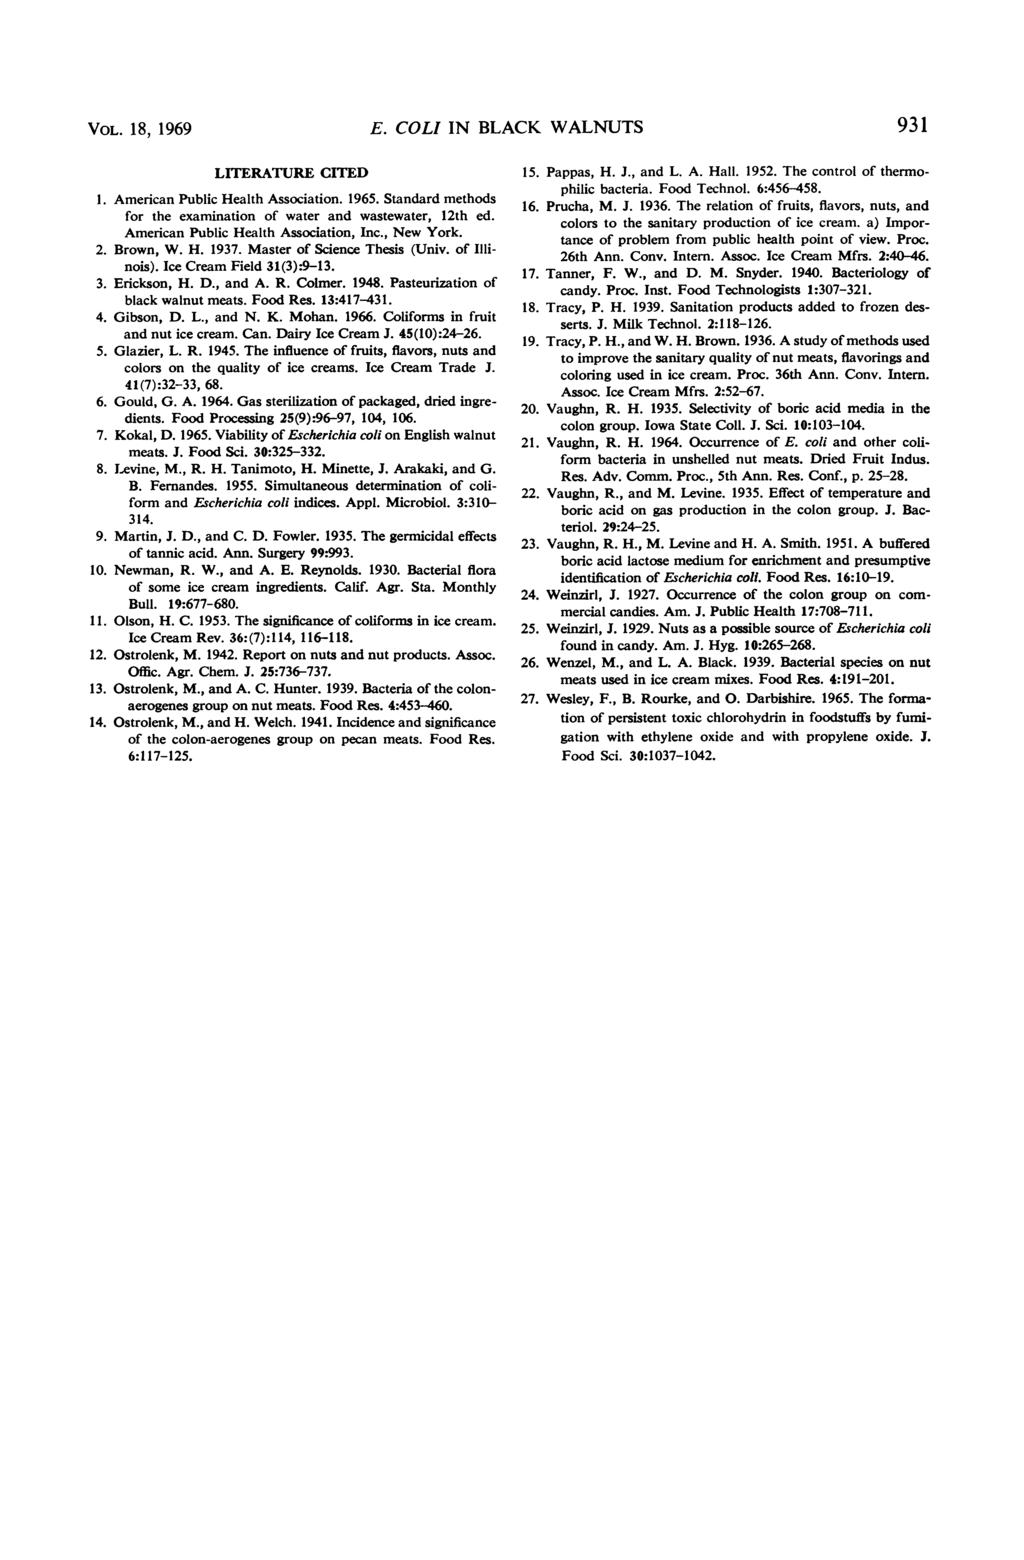 VOL. 18, 1969 E. COLI IN BLACK WALNUTS 931 LITERATURE CITED 1. American Public Health Association. 1965. Standard methods for the examination of water and wastewater, 12th ed.